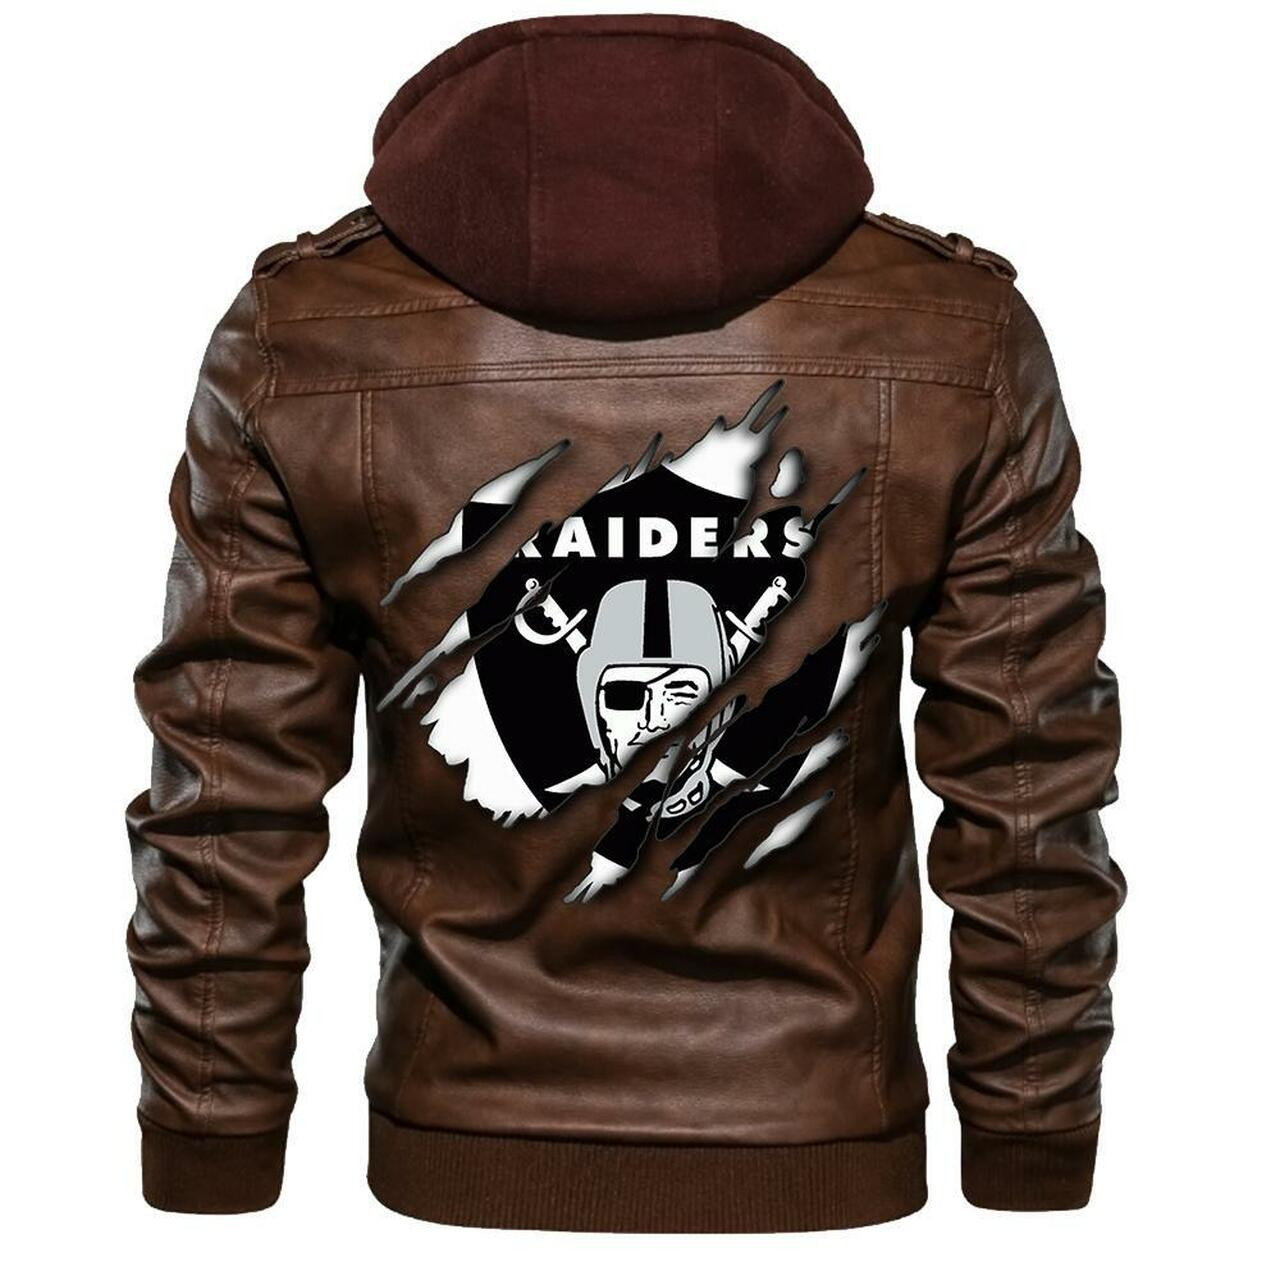 This leather Jacket will look great on you and make you stand out from the crowd 289